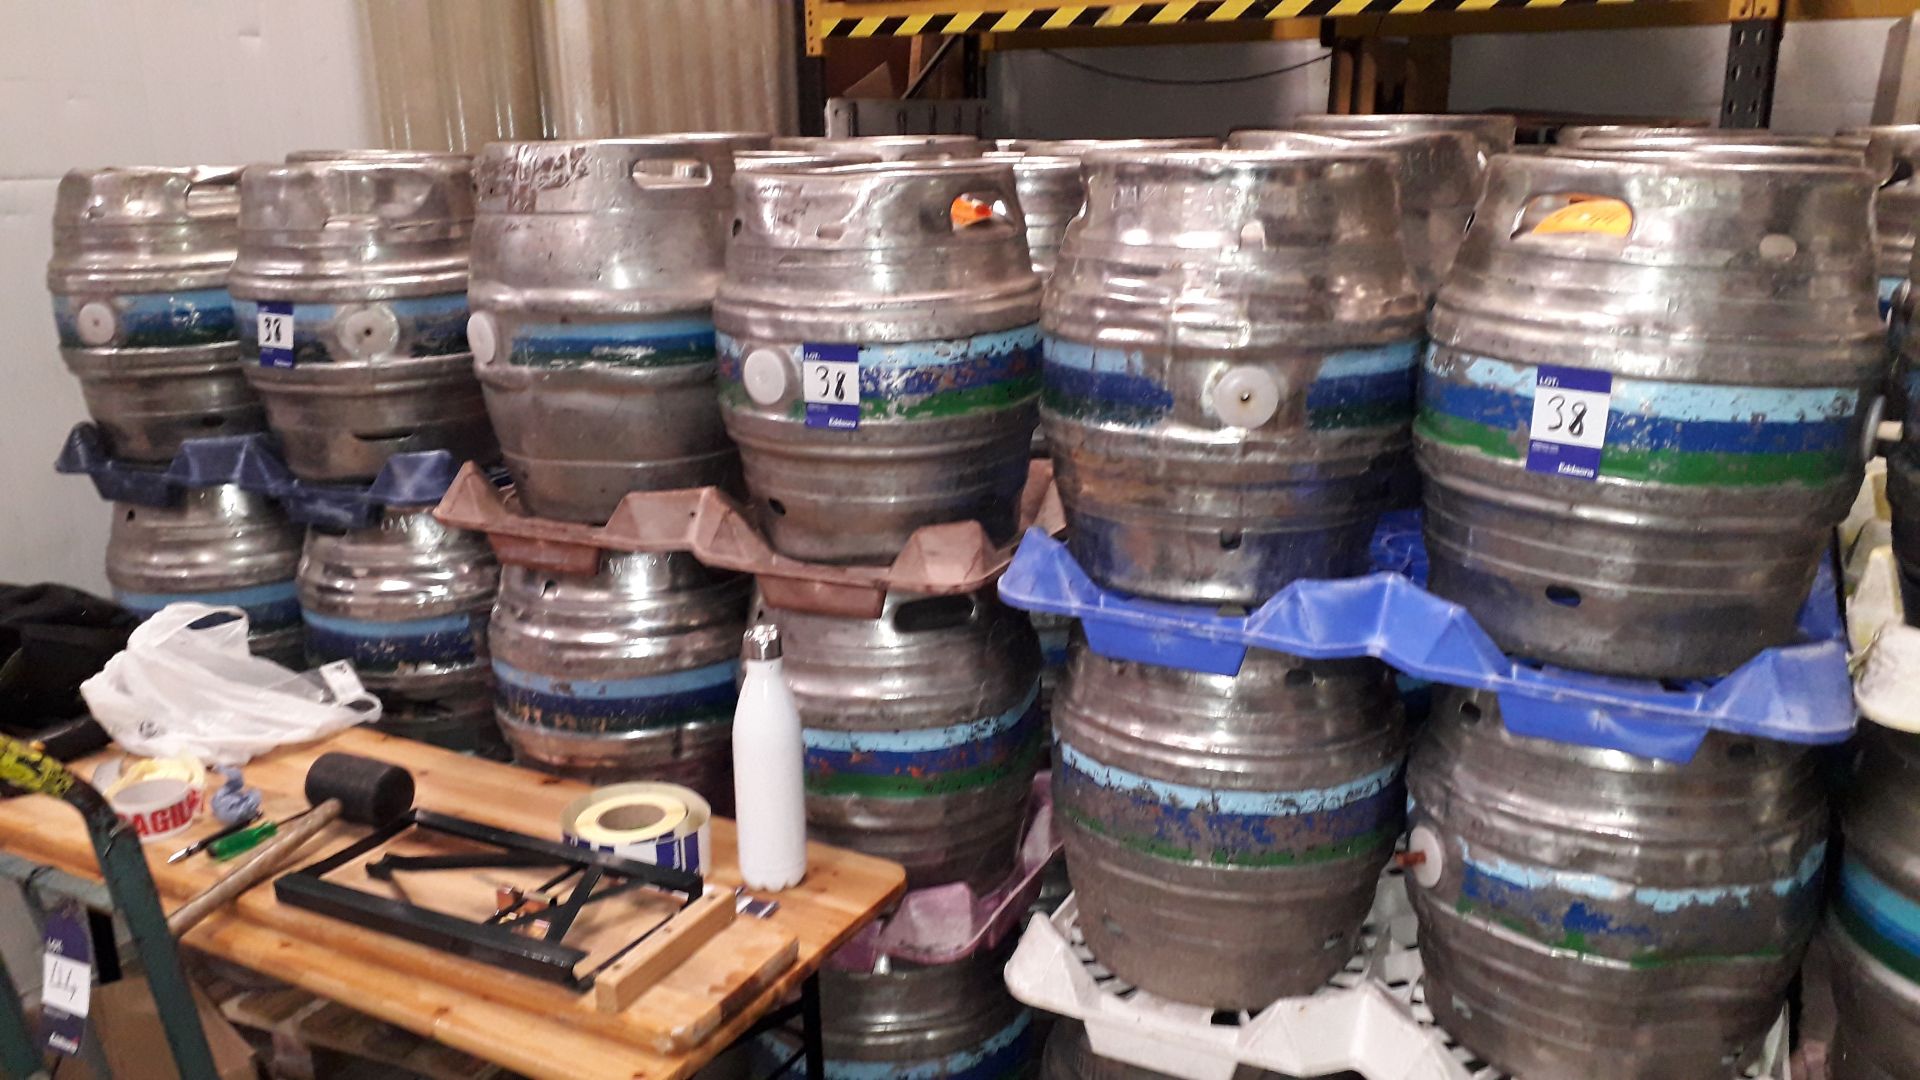 Approx. 110 x 9 Gallon Stainless Steel Beer Kegs and Quantity of Keg Pallets - Image 2 of 4